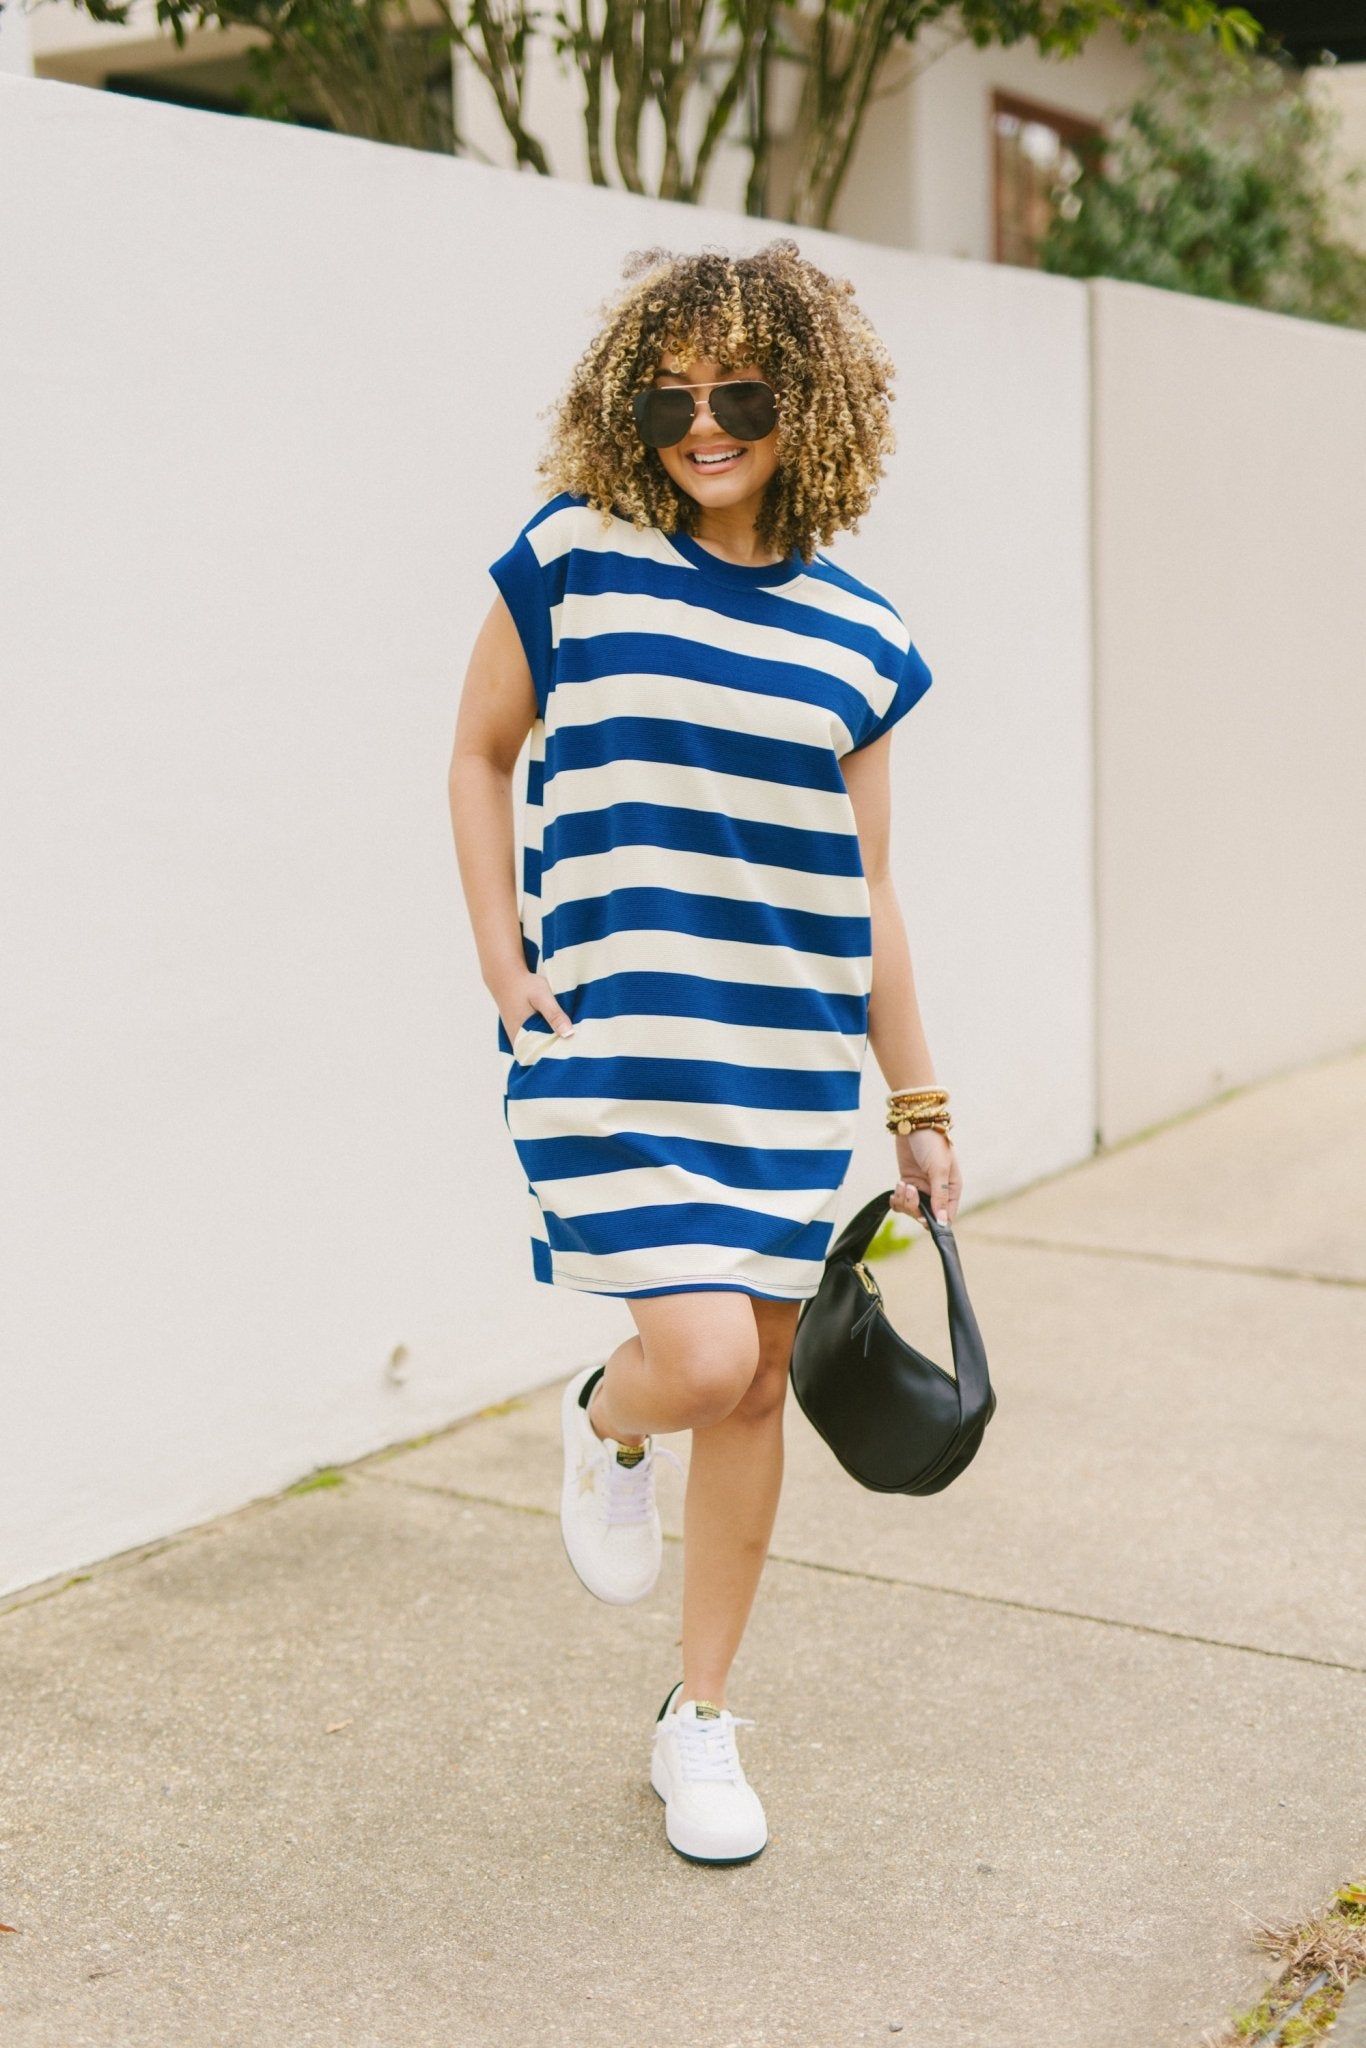 Busy Bee Dress, NAVY Dresses Under $100 - 26